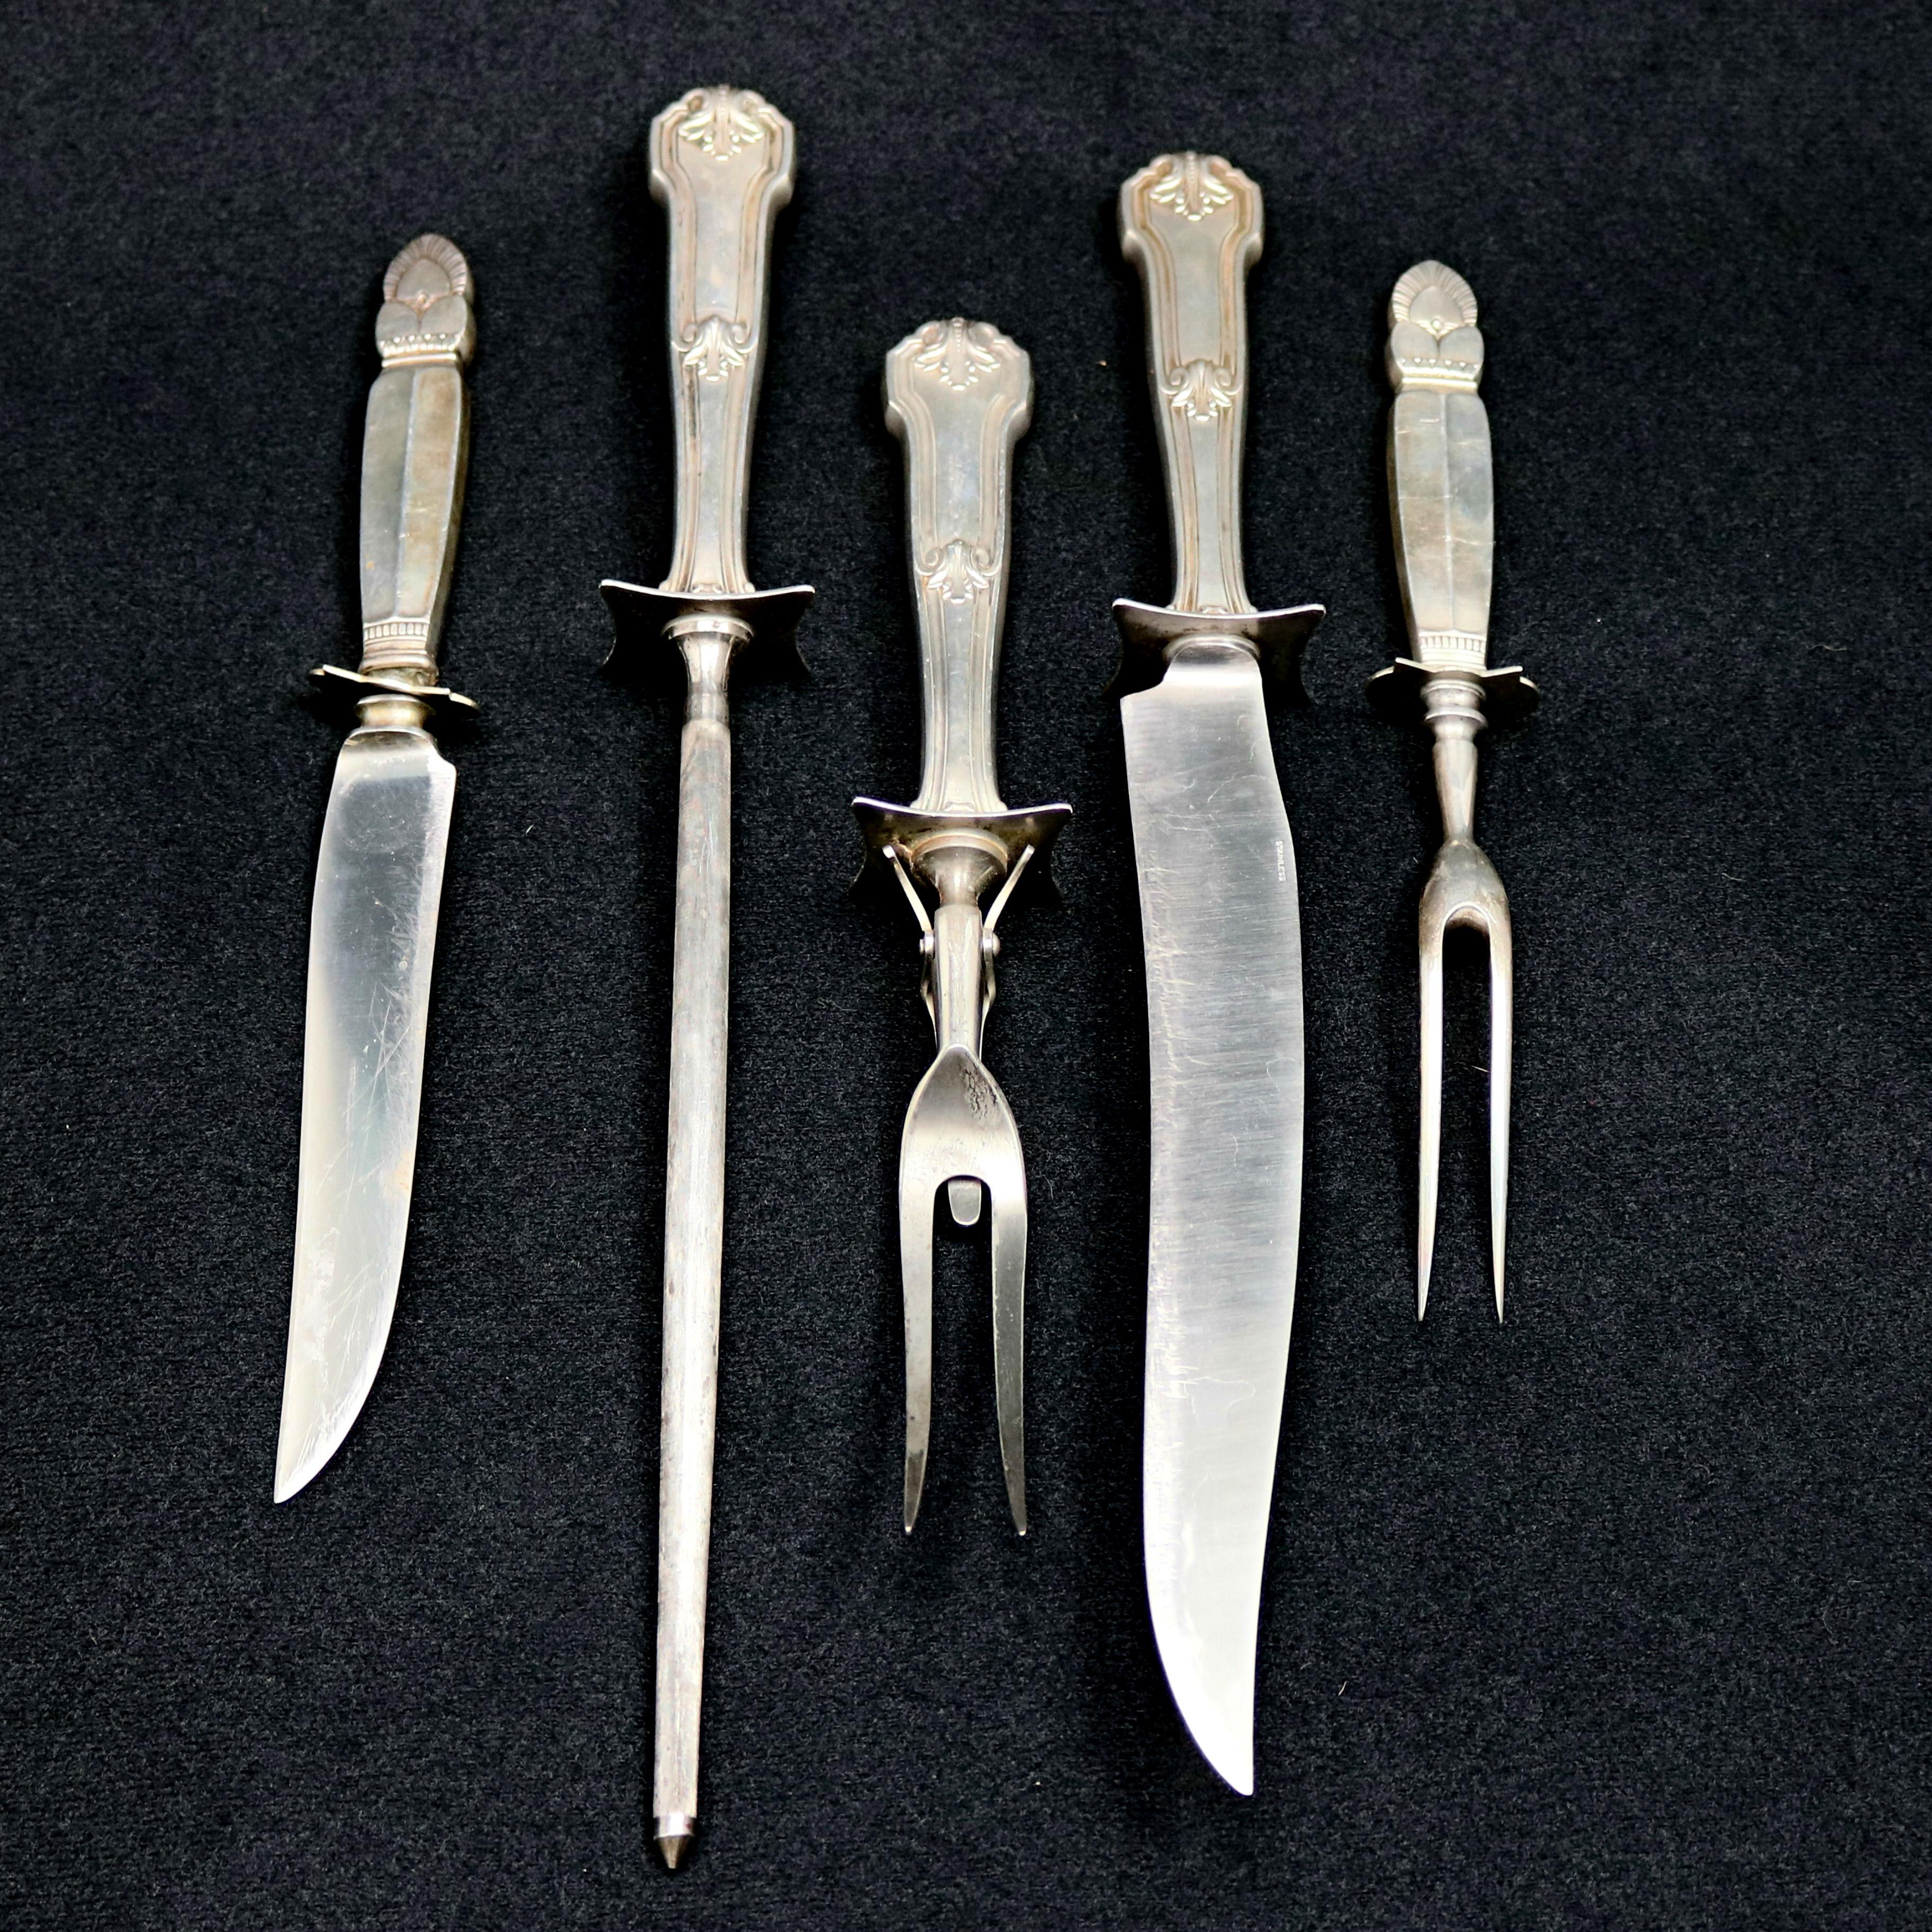 Two antique sterling silver meat carving sets offer decorated handles and, in total, include two meat forks, two carving knives and a blade sharpening rod, three piece set handles are engraved with 